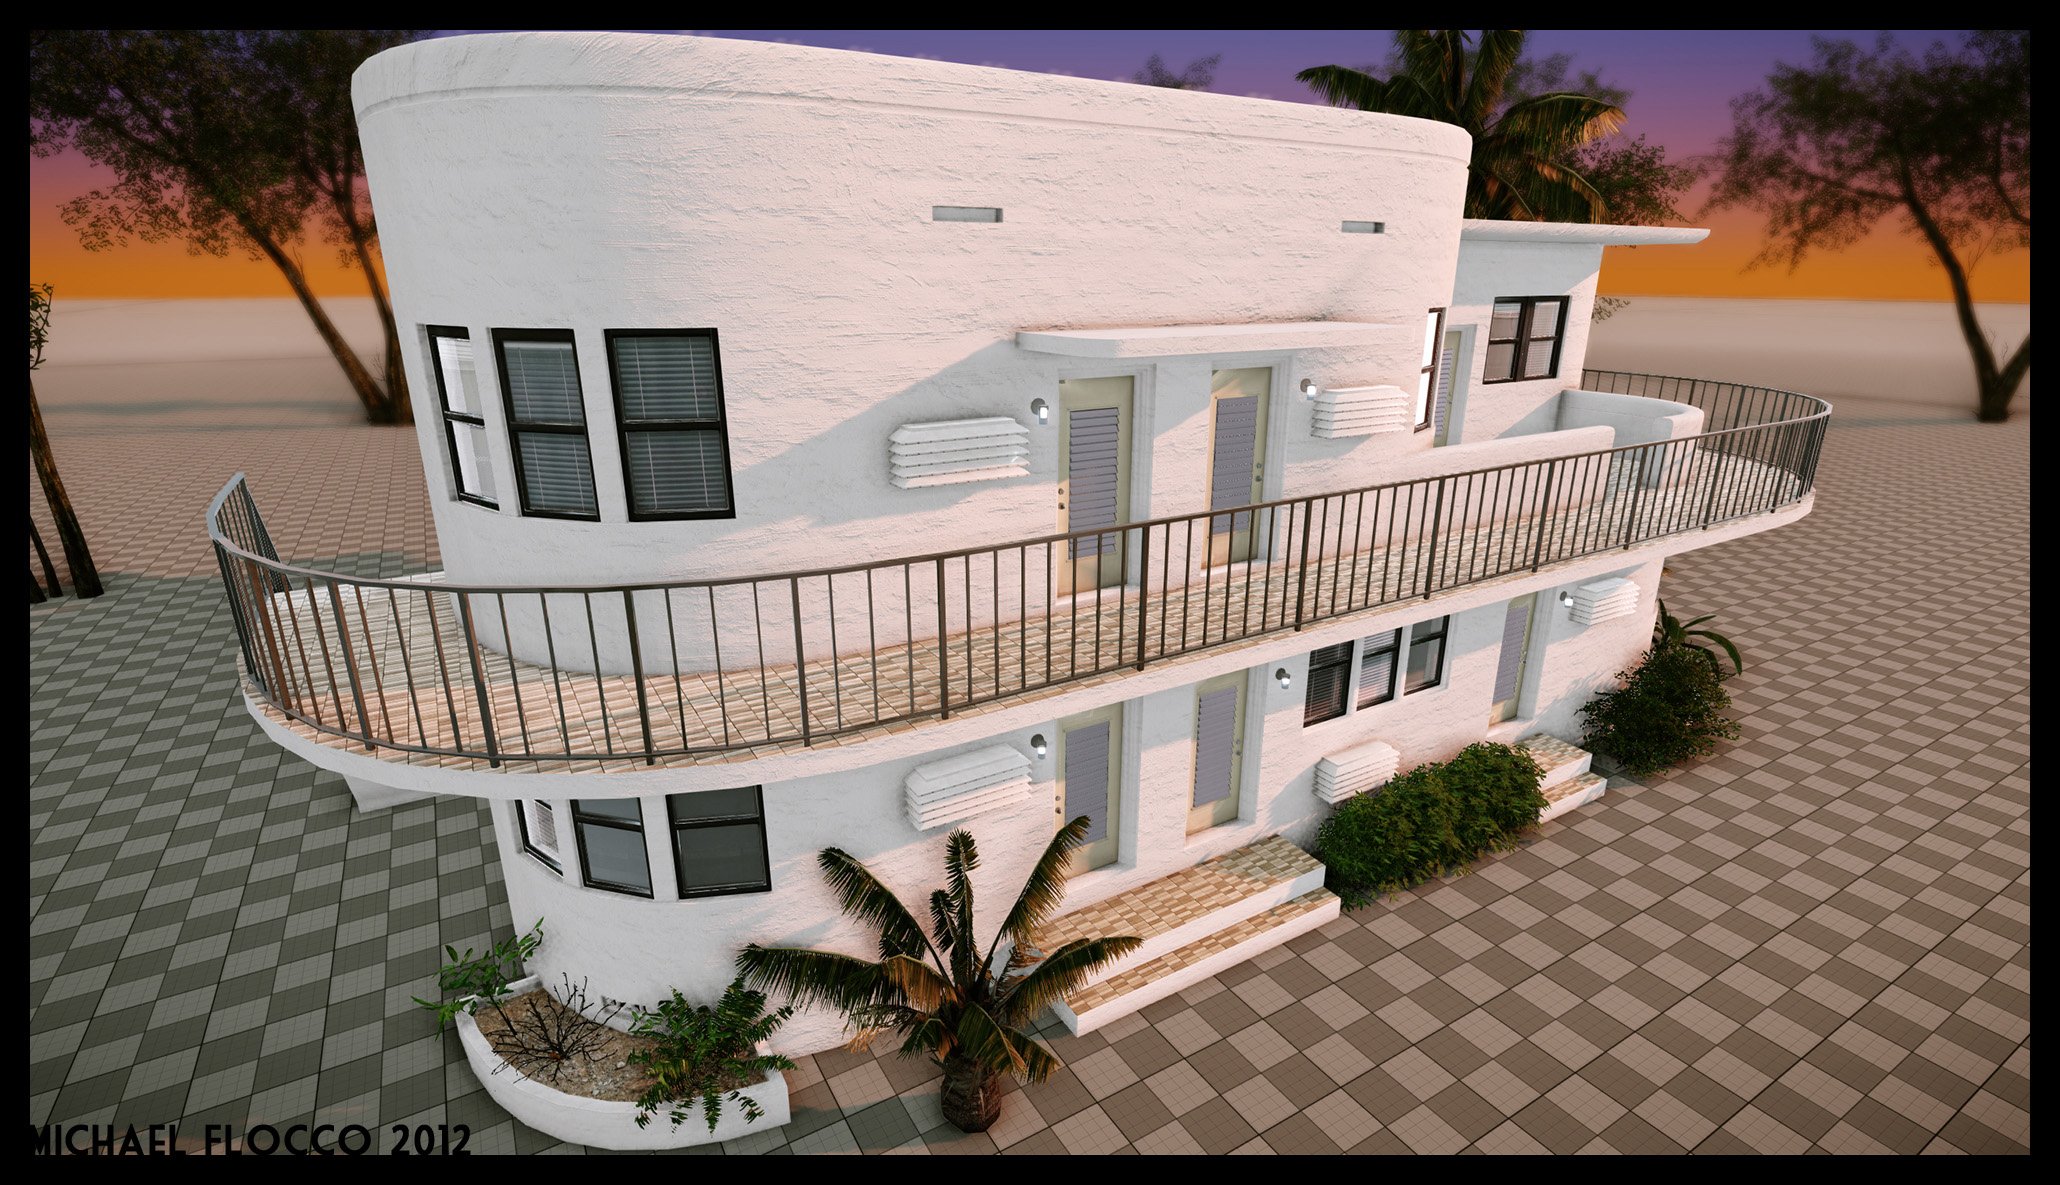  Fittings Club Tags 3d Art Deco How Are Art Deco Homes Design Like